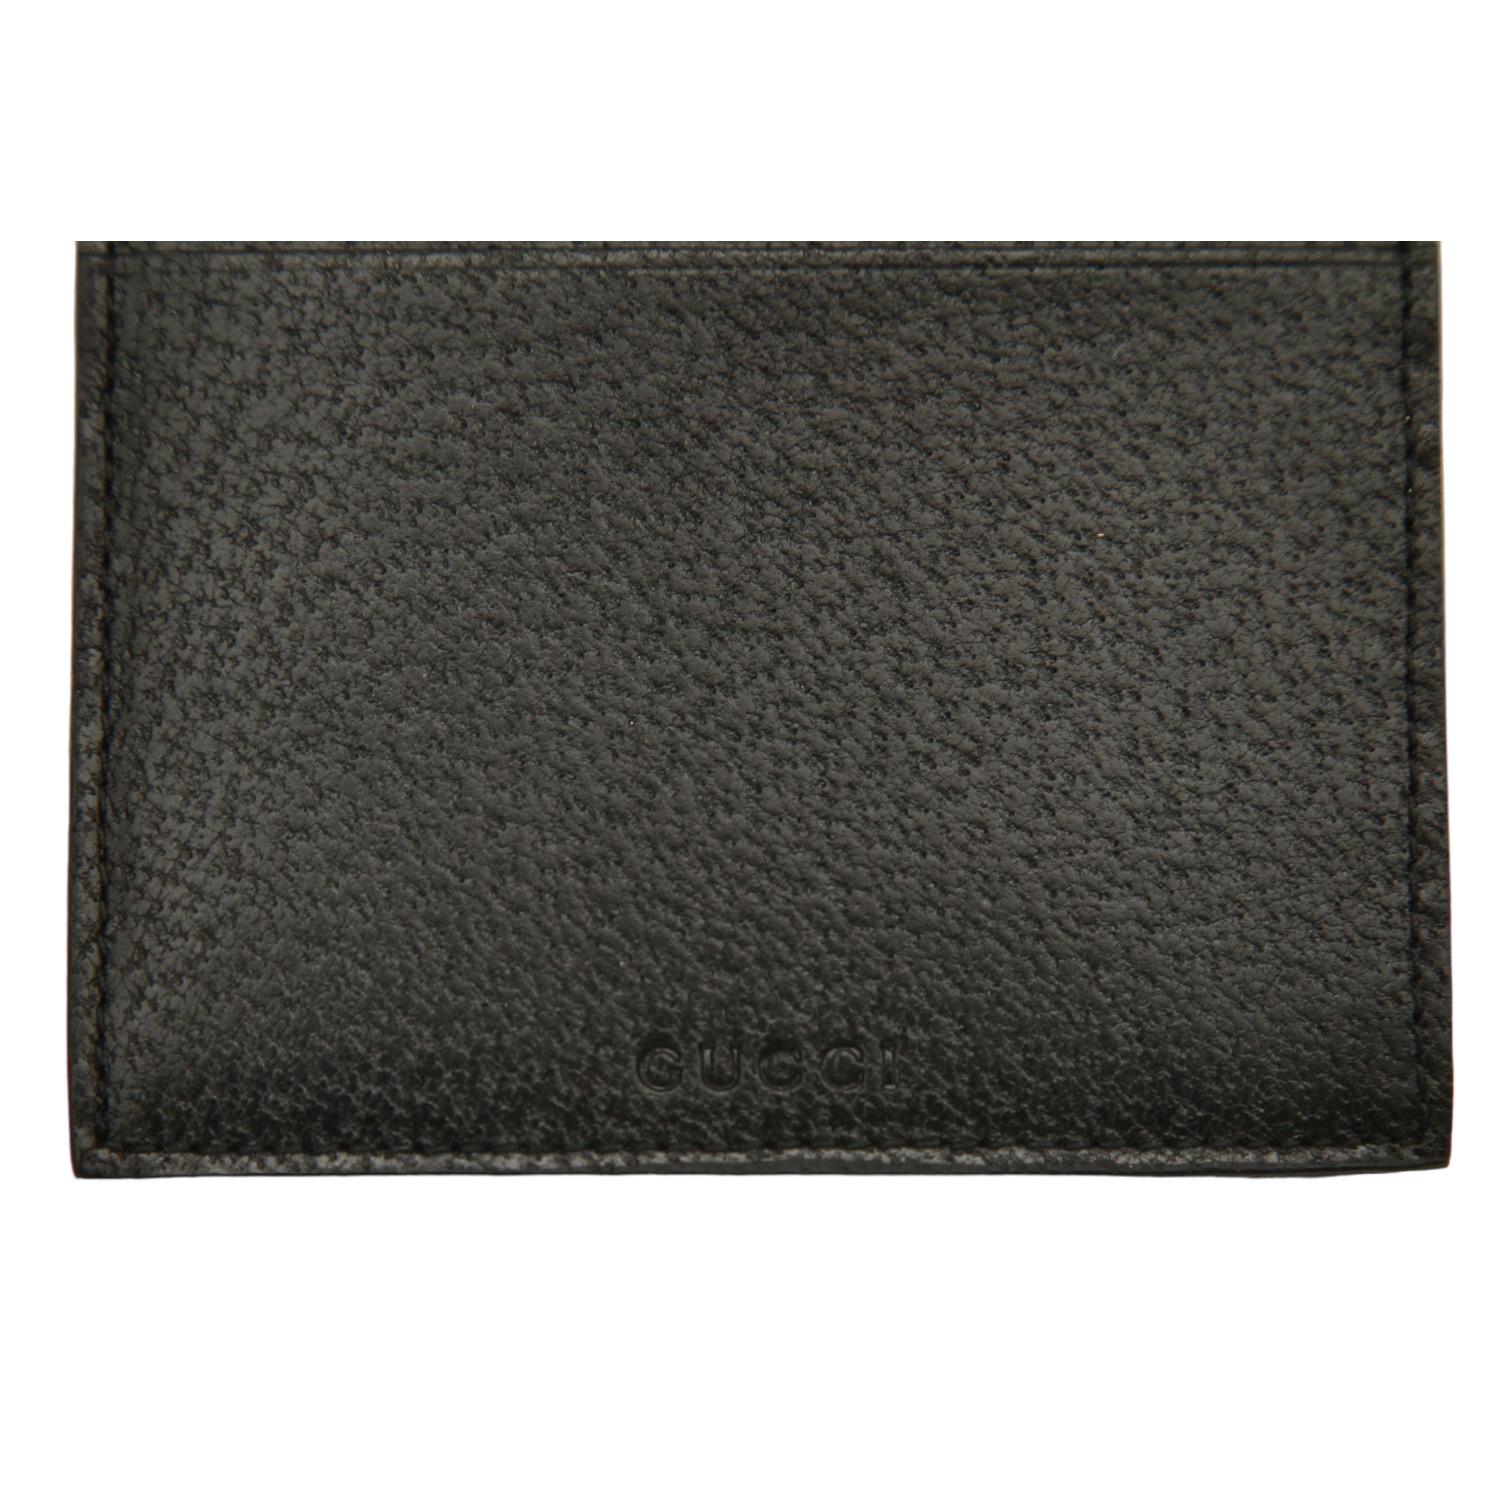 GUARANTEED AUTHENTIC GUCCI BLACK LEATHER CARD HOLDER


Design: 
  - Black leather.
   - 5 card slots.
  - Bill pocket.
  - Document slot holder.
  - Signature embossed.
  - Comes with box. 

Bag Measurements (Approximate):
   - Height, 3.5